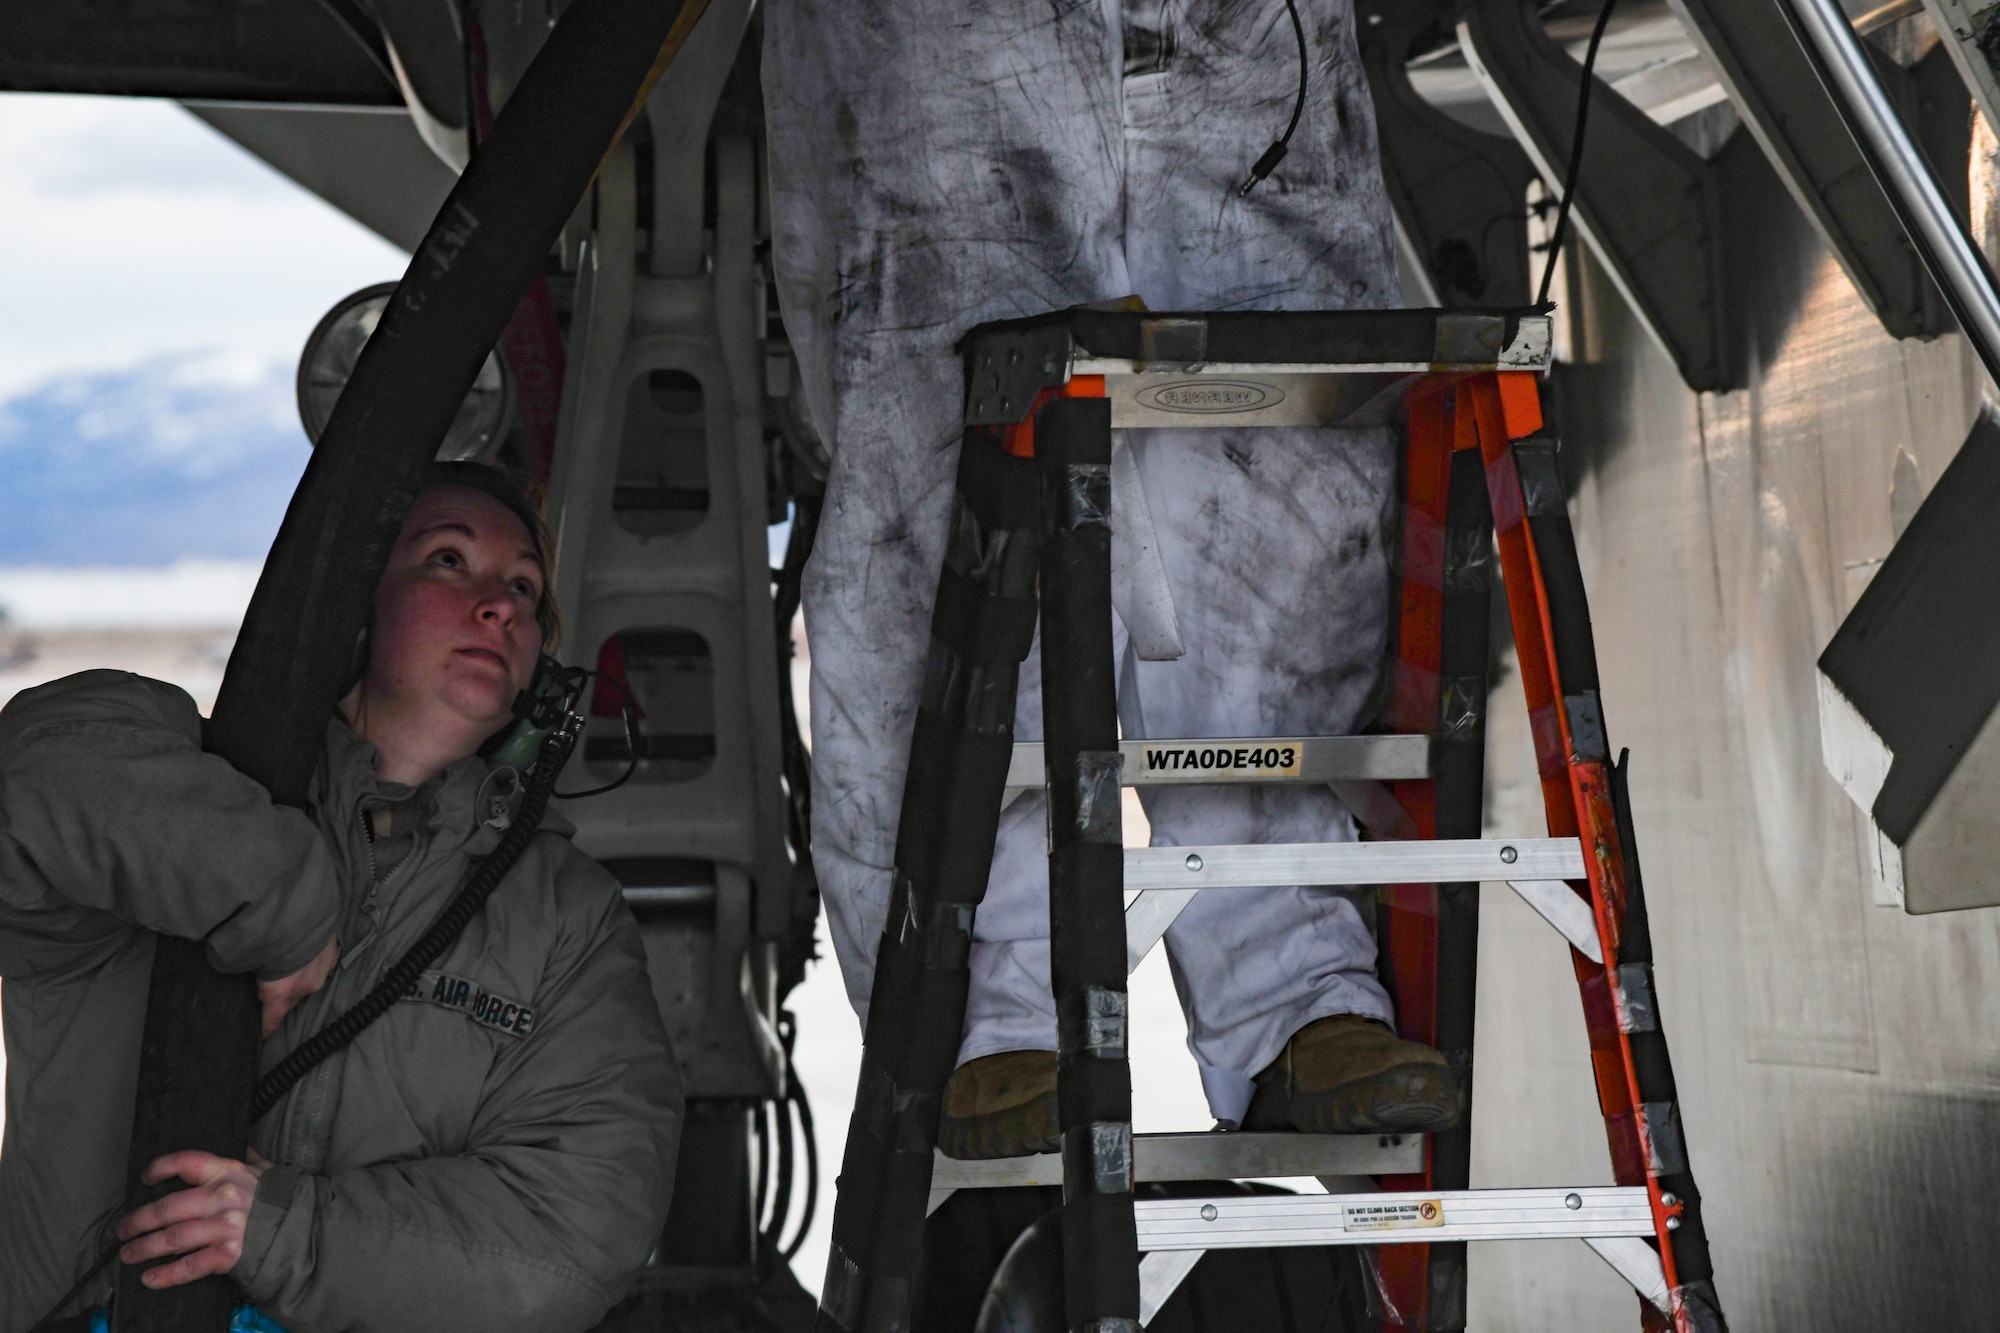 U.S. Air Force Senior Airman Haylee Lund, 393rd Expeditionary Bomb Squadron crew chief, assist securing a fuel line to a B-2 Spirit Stealth Bomber during Red Flag 21-1 at Nellis Air Force Base, Nevada, Jan. 26, 2021. This large force exercise demonstrates the credibility of U.S. and partner forces to address a global security environment and ensure Team Whiteman is able to honor its security commitments. (U.S. Air Force photo by Staff Sgt. Sadie Colbert)